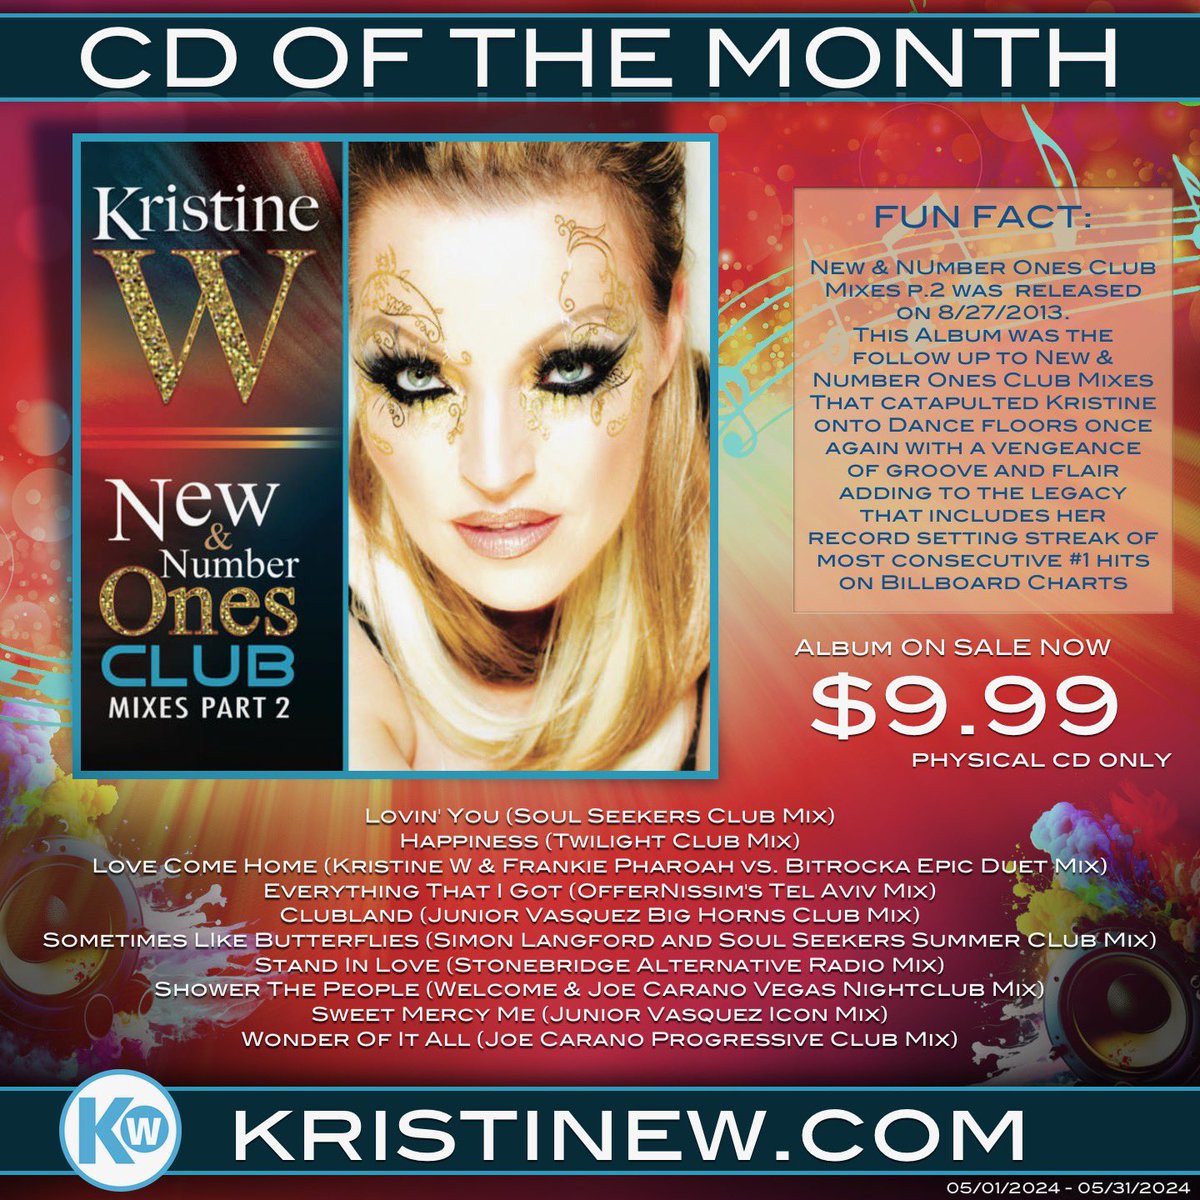 Alrighty gang, my CD of the month for May is my “New and Number Ones Club Mixes Part 2” normally $15.99 on my website but currently currently on sale for the month of May for $9.99. Head on over to kristinew.com, navigate to the store and place your order! Xo KW